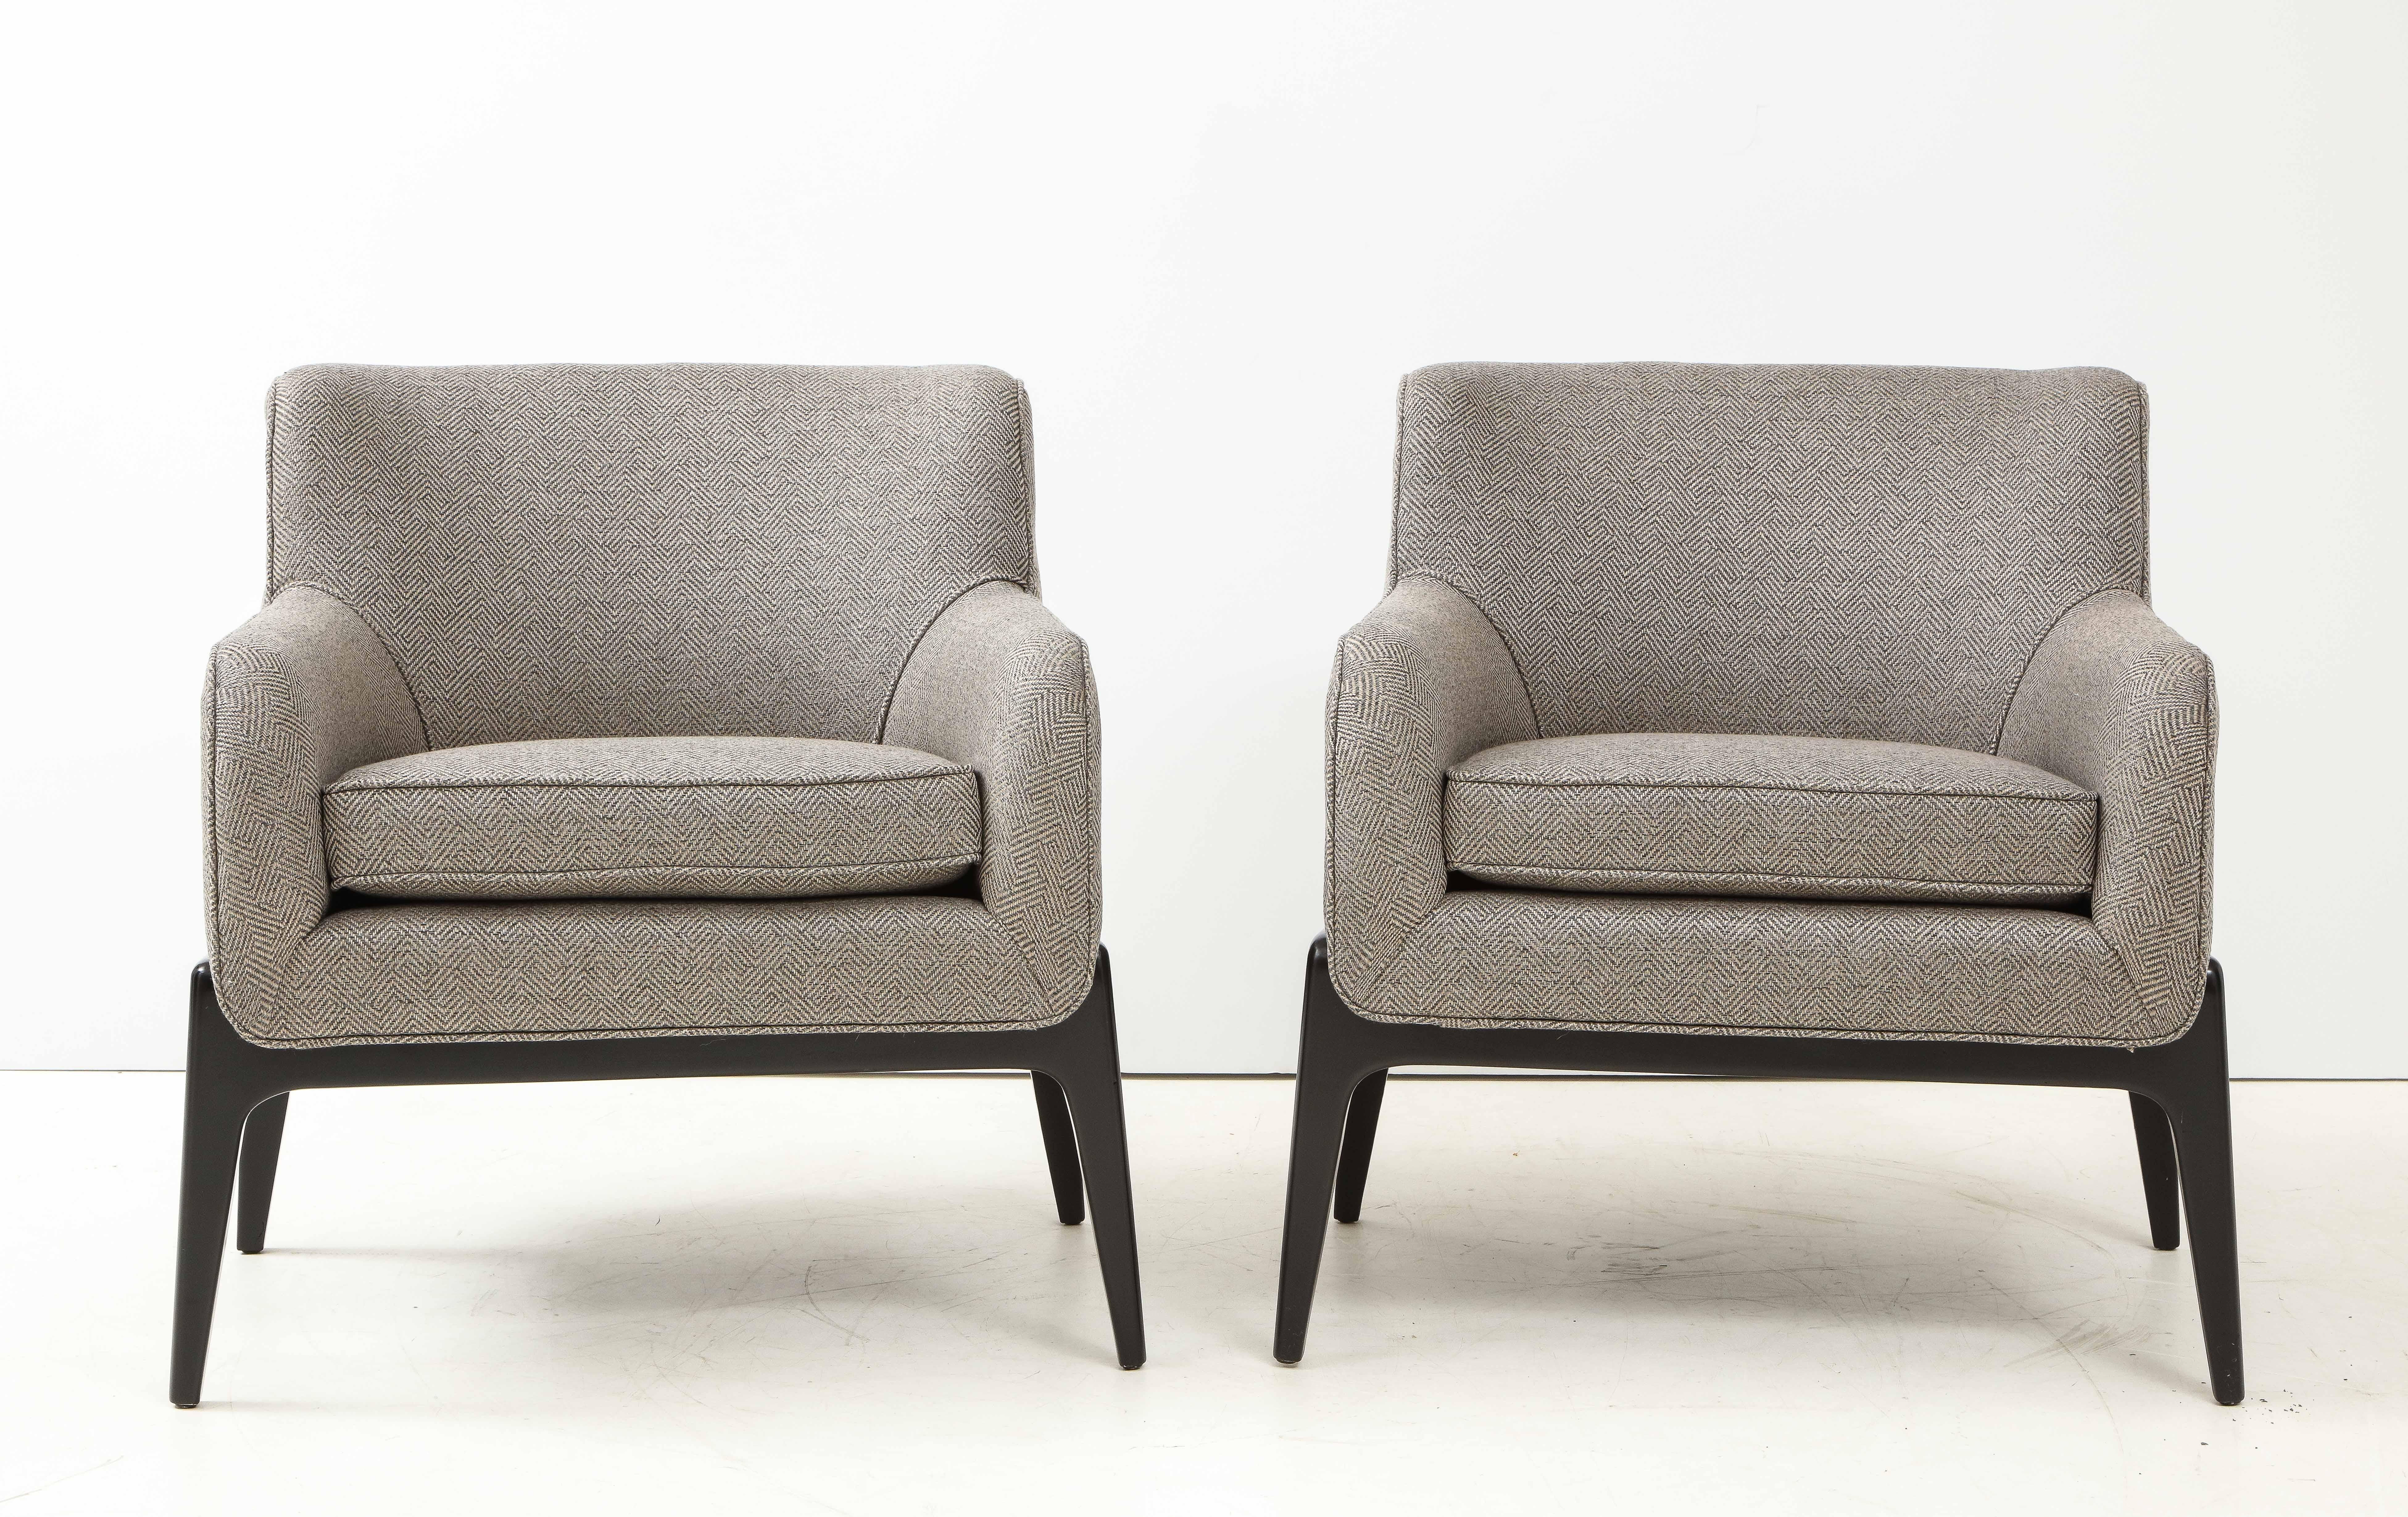 Stunning pair of 1960s Mid-Century Modern lounge chairs, fully restored and newly re-upholstered.